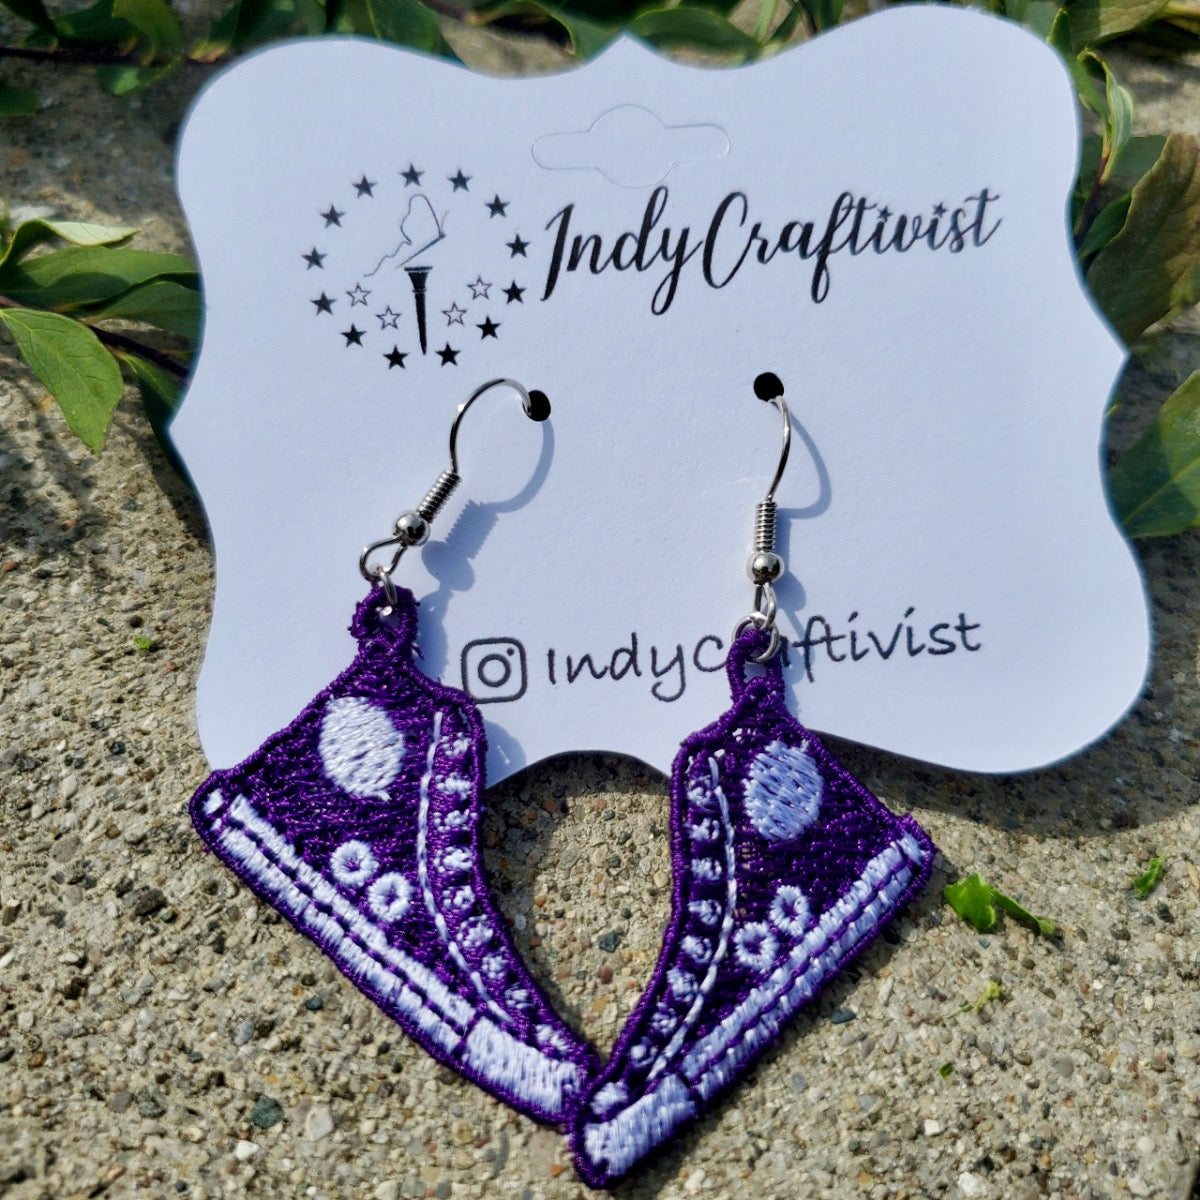 Made-To-Order "I'm Speaking" Converse Like Earrings